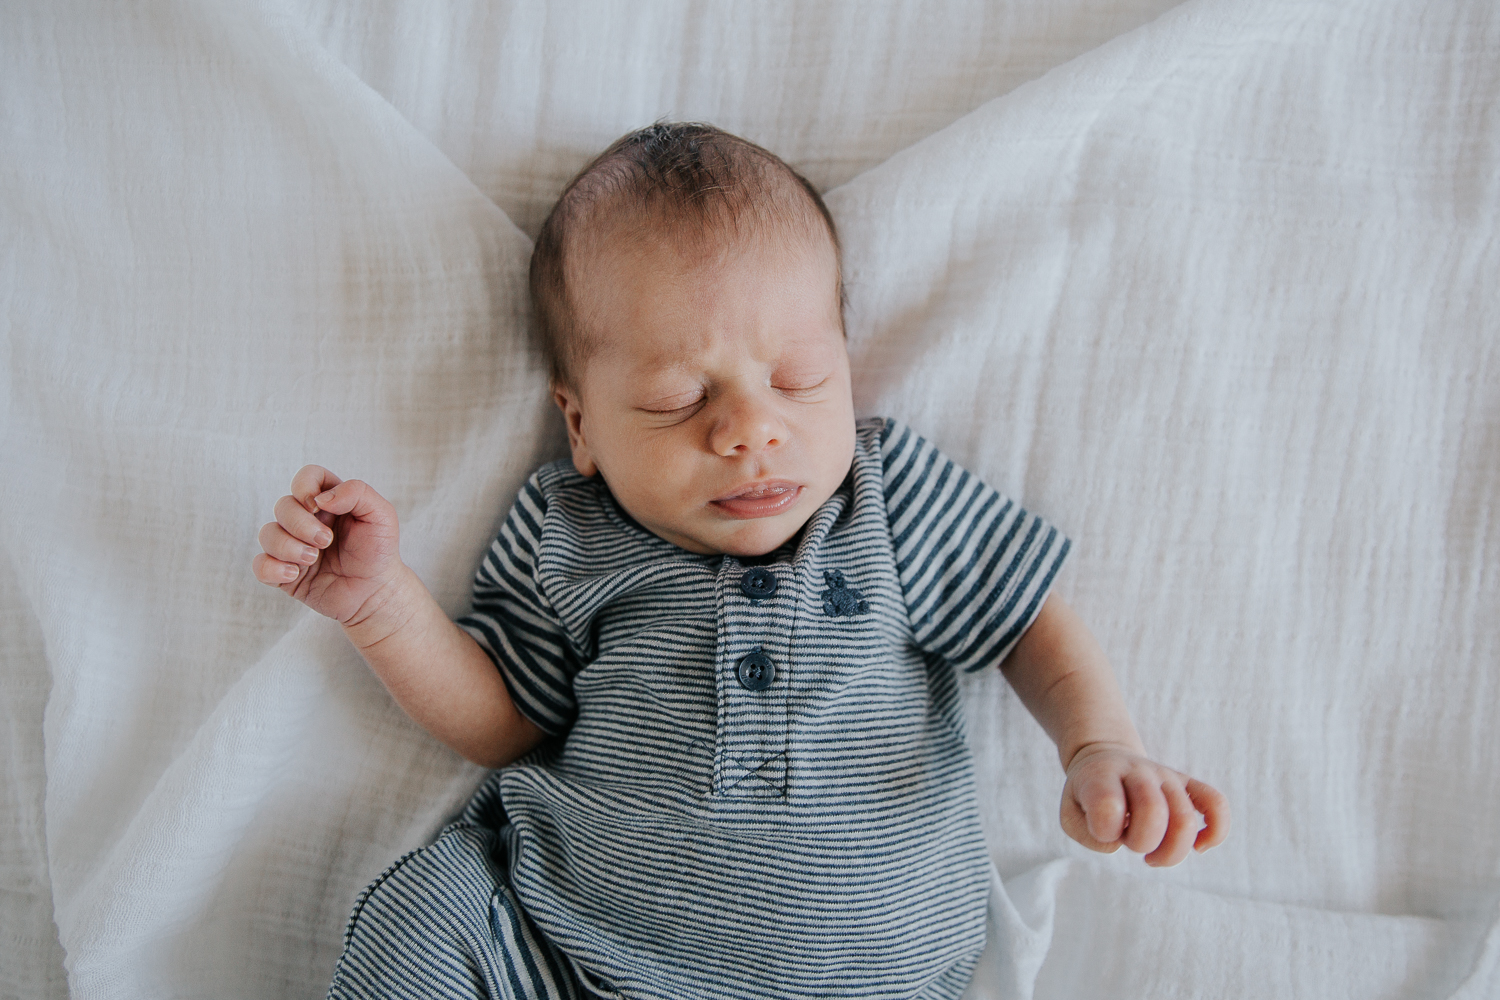 2 week old baby boy in blue outfit sleeping on bed - Barrie In-Home Photography